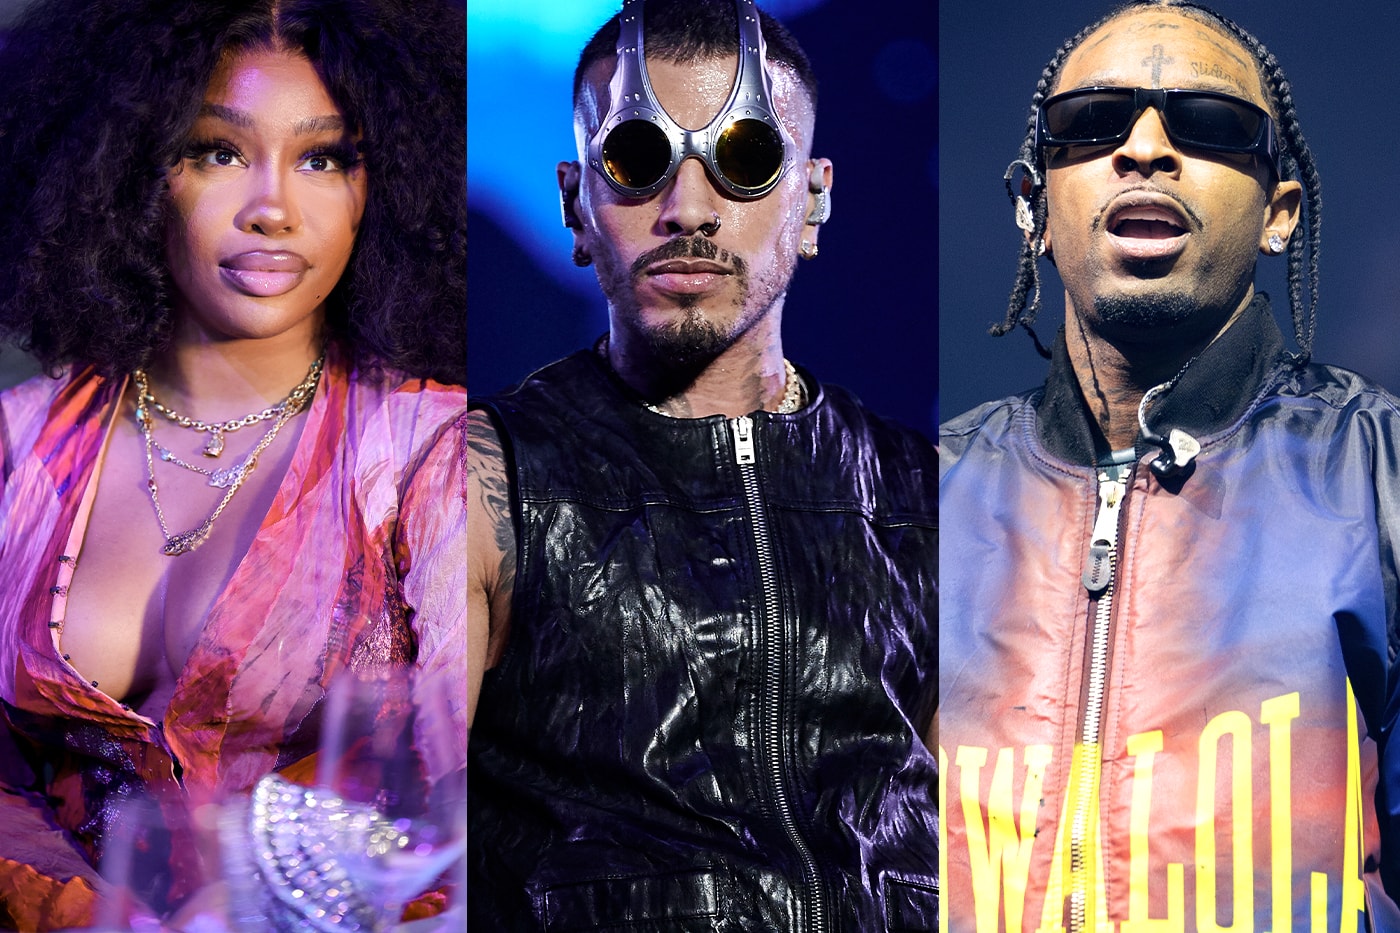 SZA, Rauw Alejandro and 21 Savage Will Headline Gov Ball 2024 post malone the killers peso pluma new york city tickets sale general presale price general admission vip festival victoria monet teezo touchdown dominic fike don toliver renee rap faye webster kevin abstract yung gravy